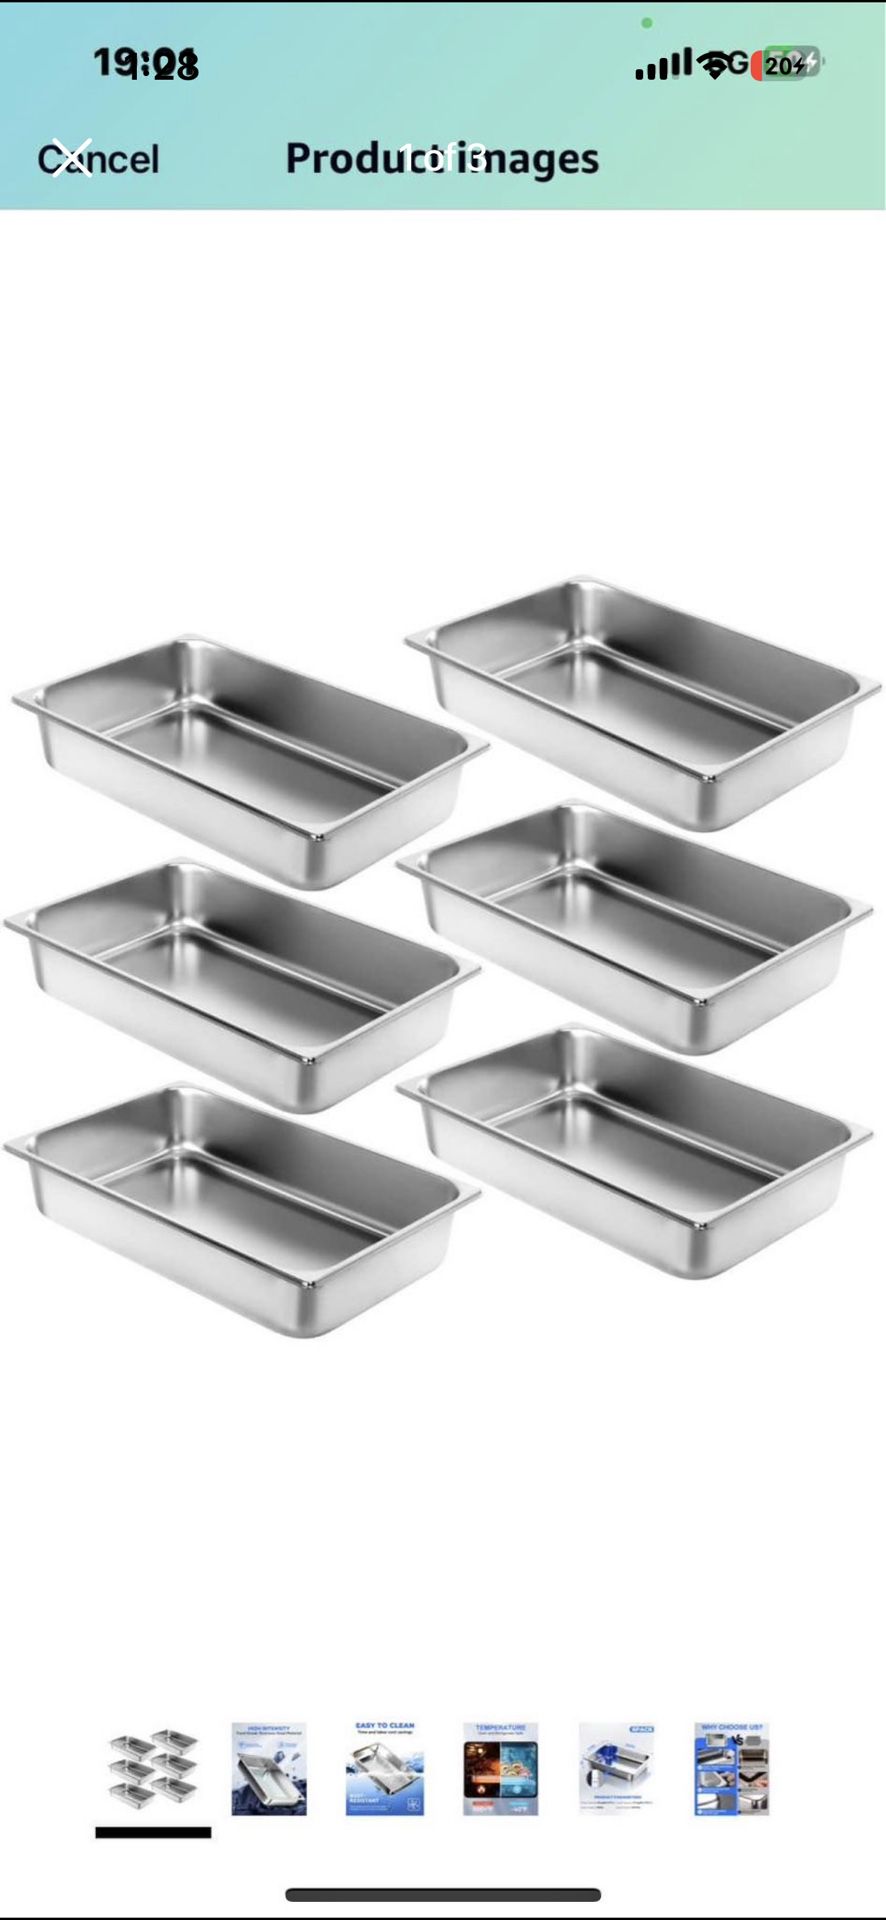 Winco 4-Inch Pan, Full, Stainless Steel,6pack  Material Stainless Steel Finish Type Stainless Steel Brand Winco Color Stainless Steel Capacity 1